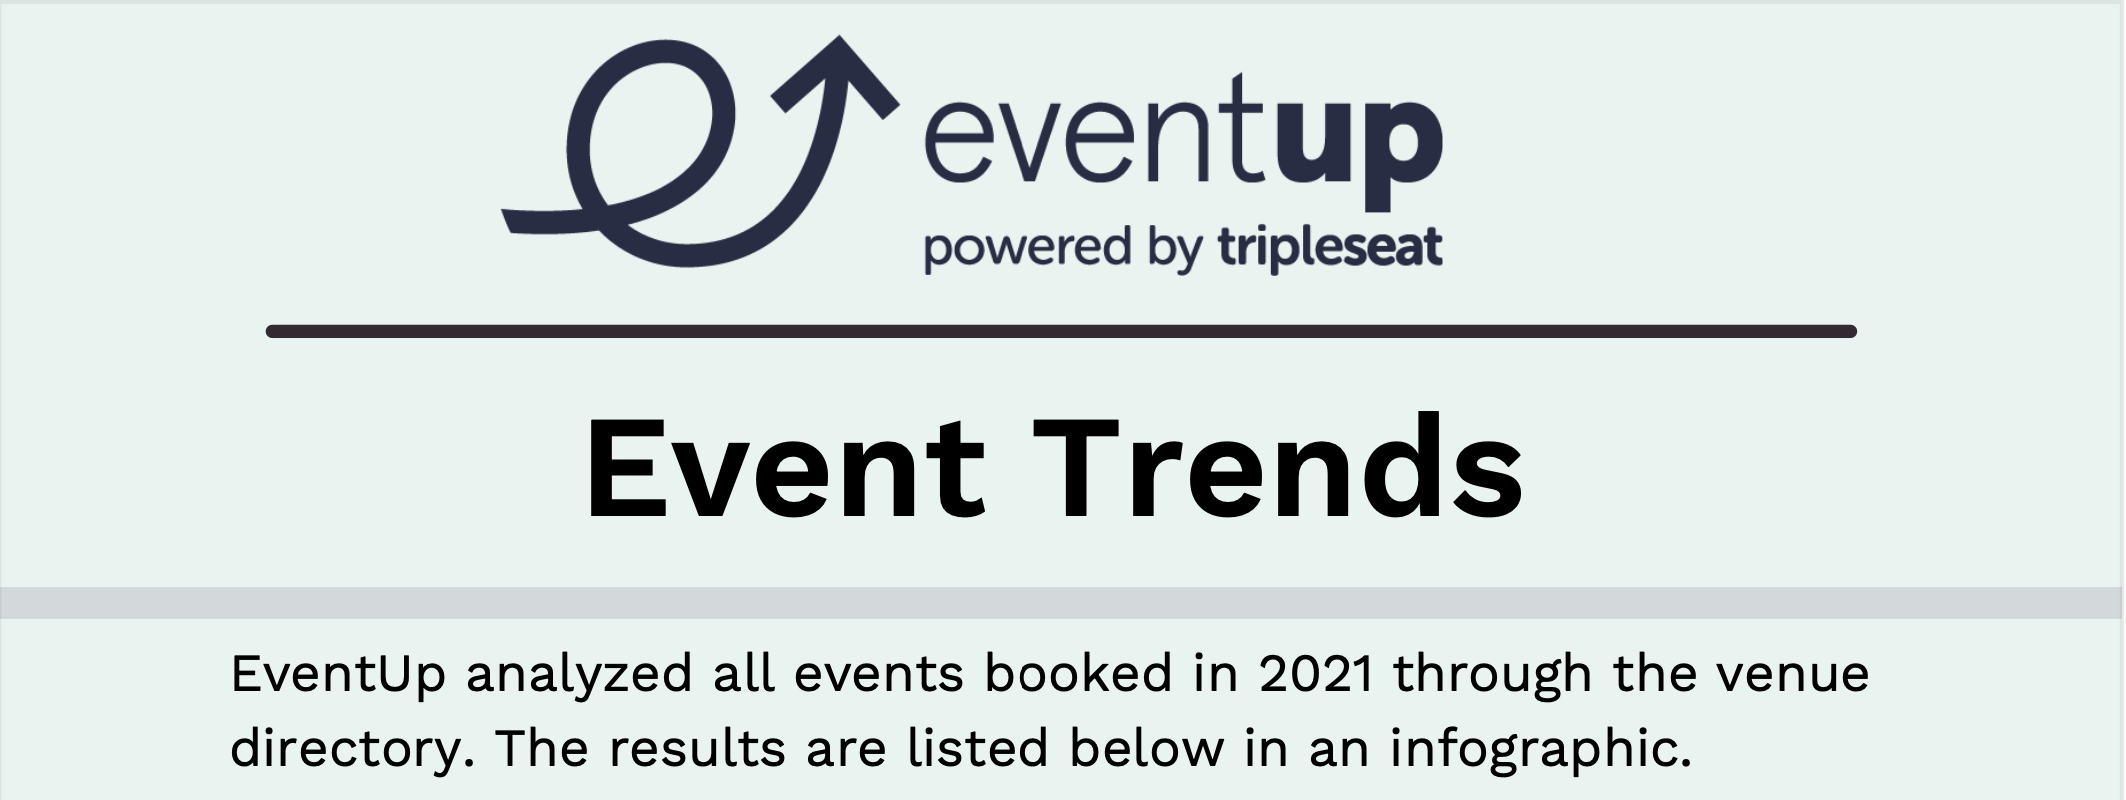 EventUp Venue Directory - 2021 Event Trends & Infographic